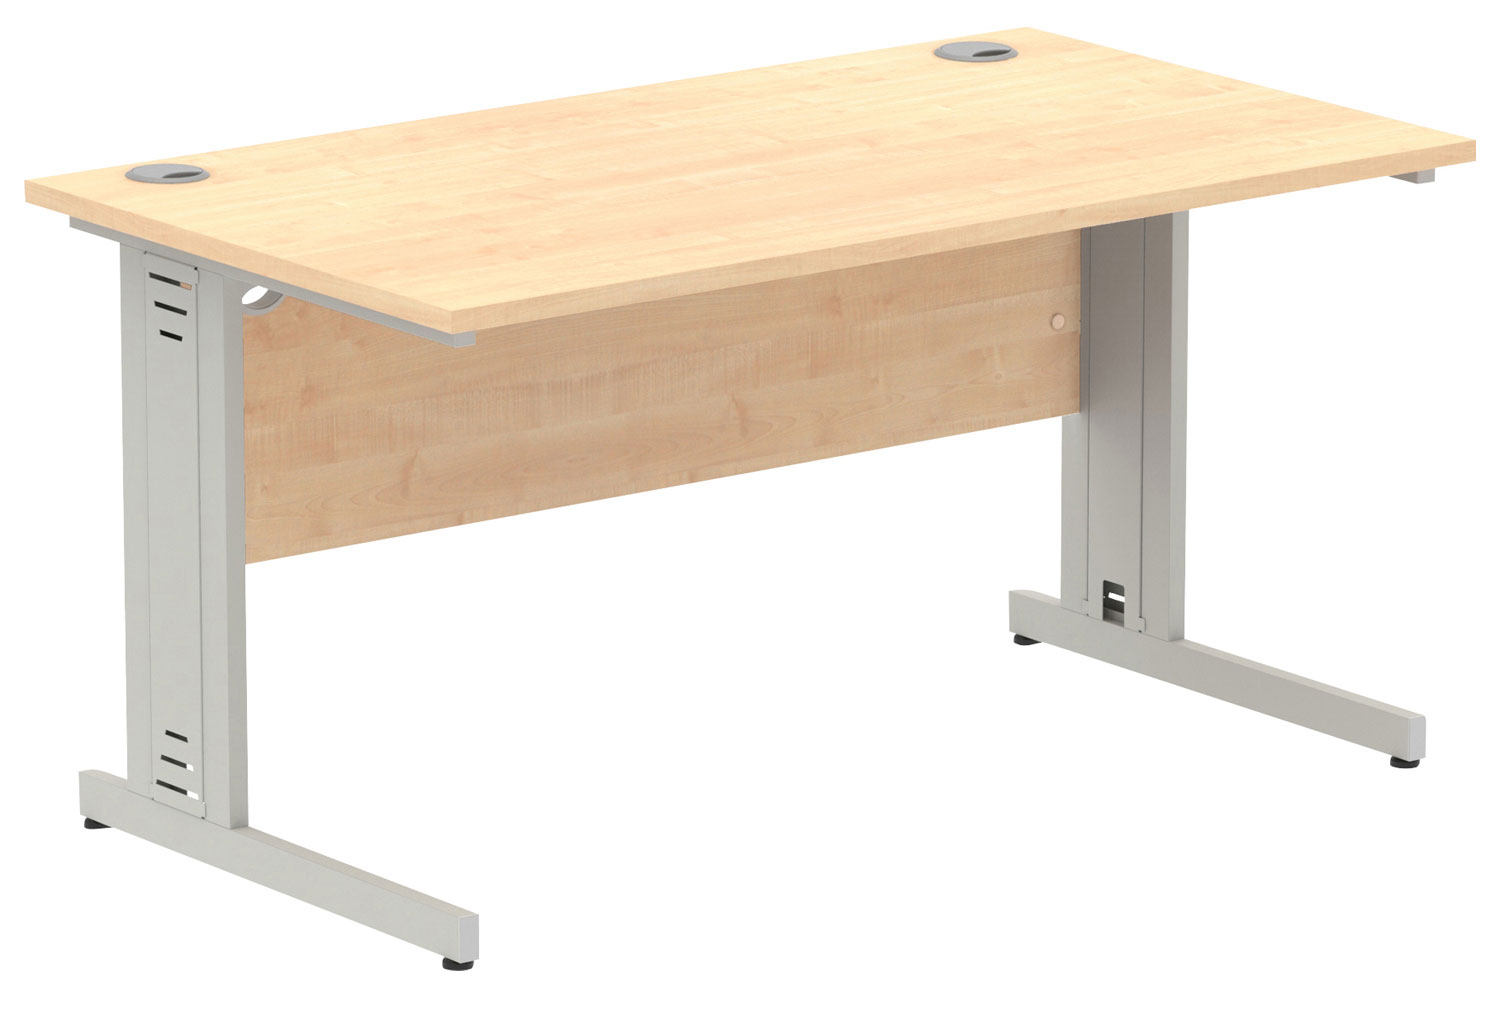 Vitali Deluxe Rectangular Office Desk (Silver Legs), 140wx80dx73h (cm), Maple, Express Delivery